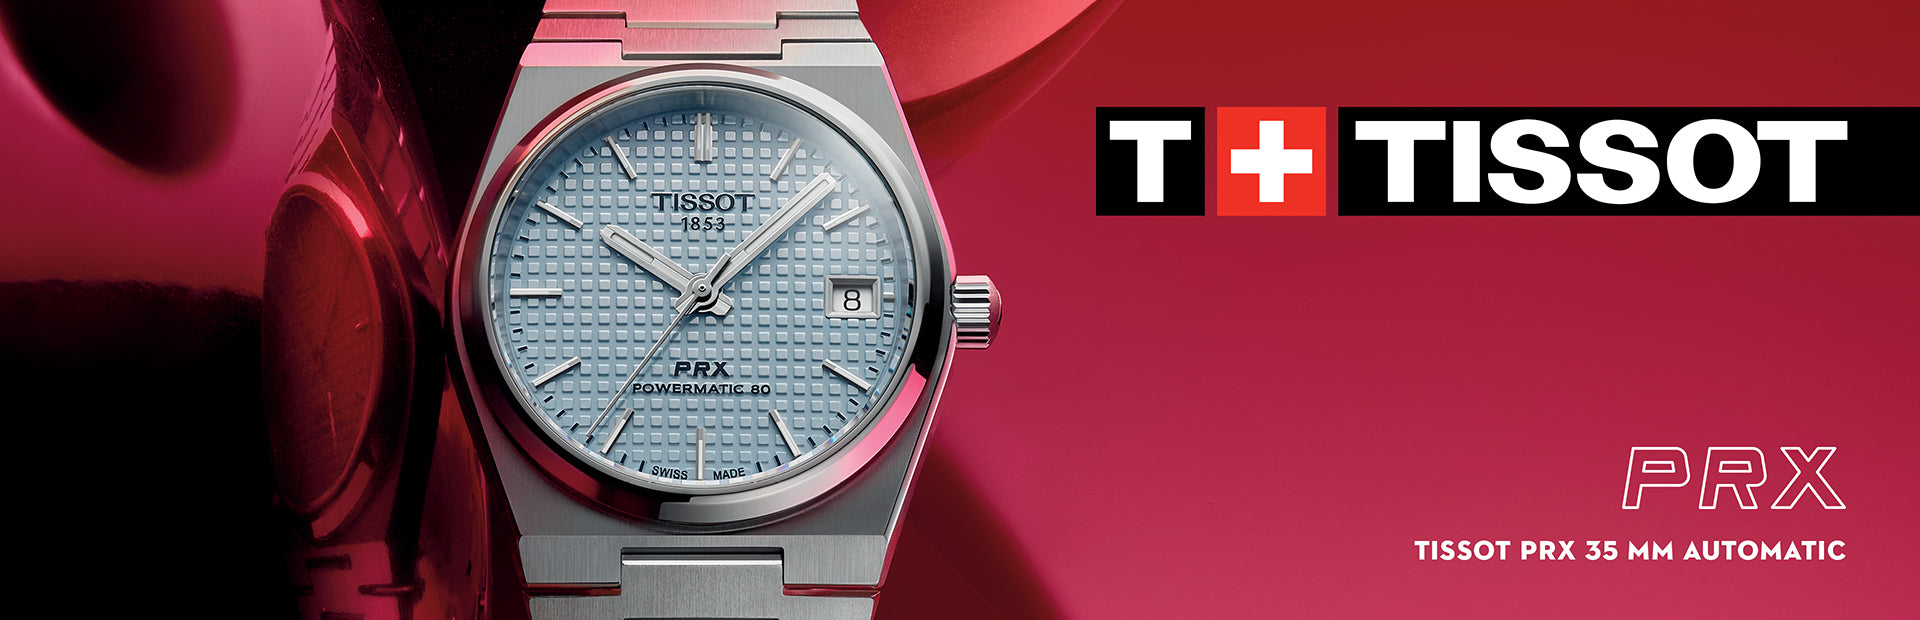 TISSOT PRX 35MM AUTOMATIC ICE BLUE DIAL Available at ORLY Jewellers